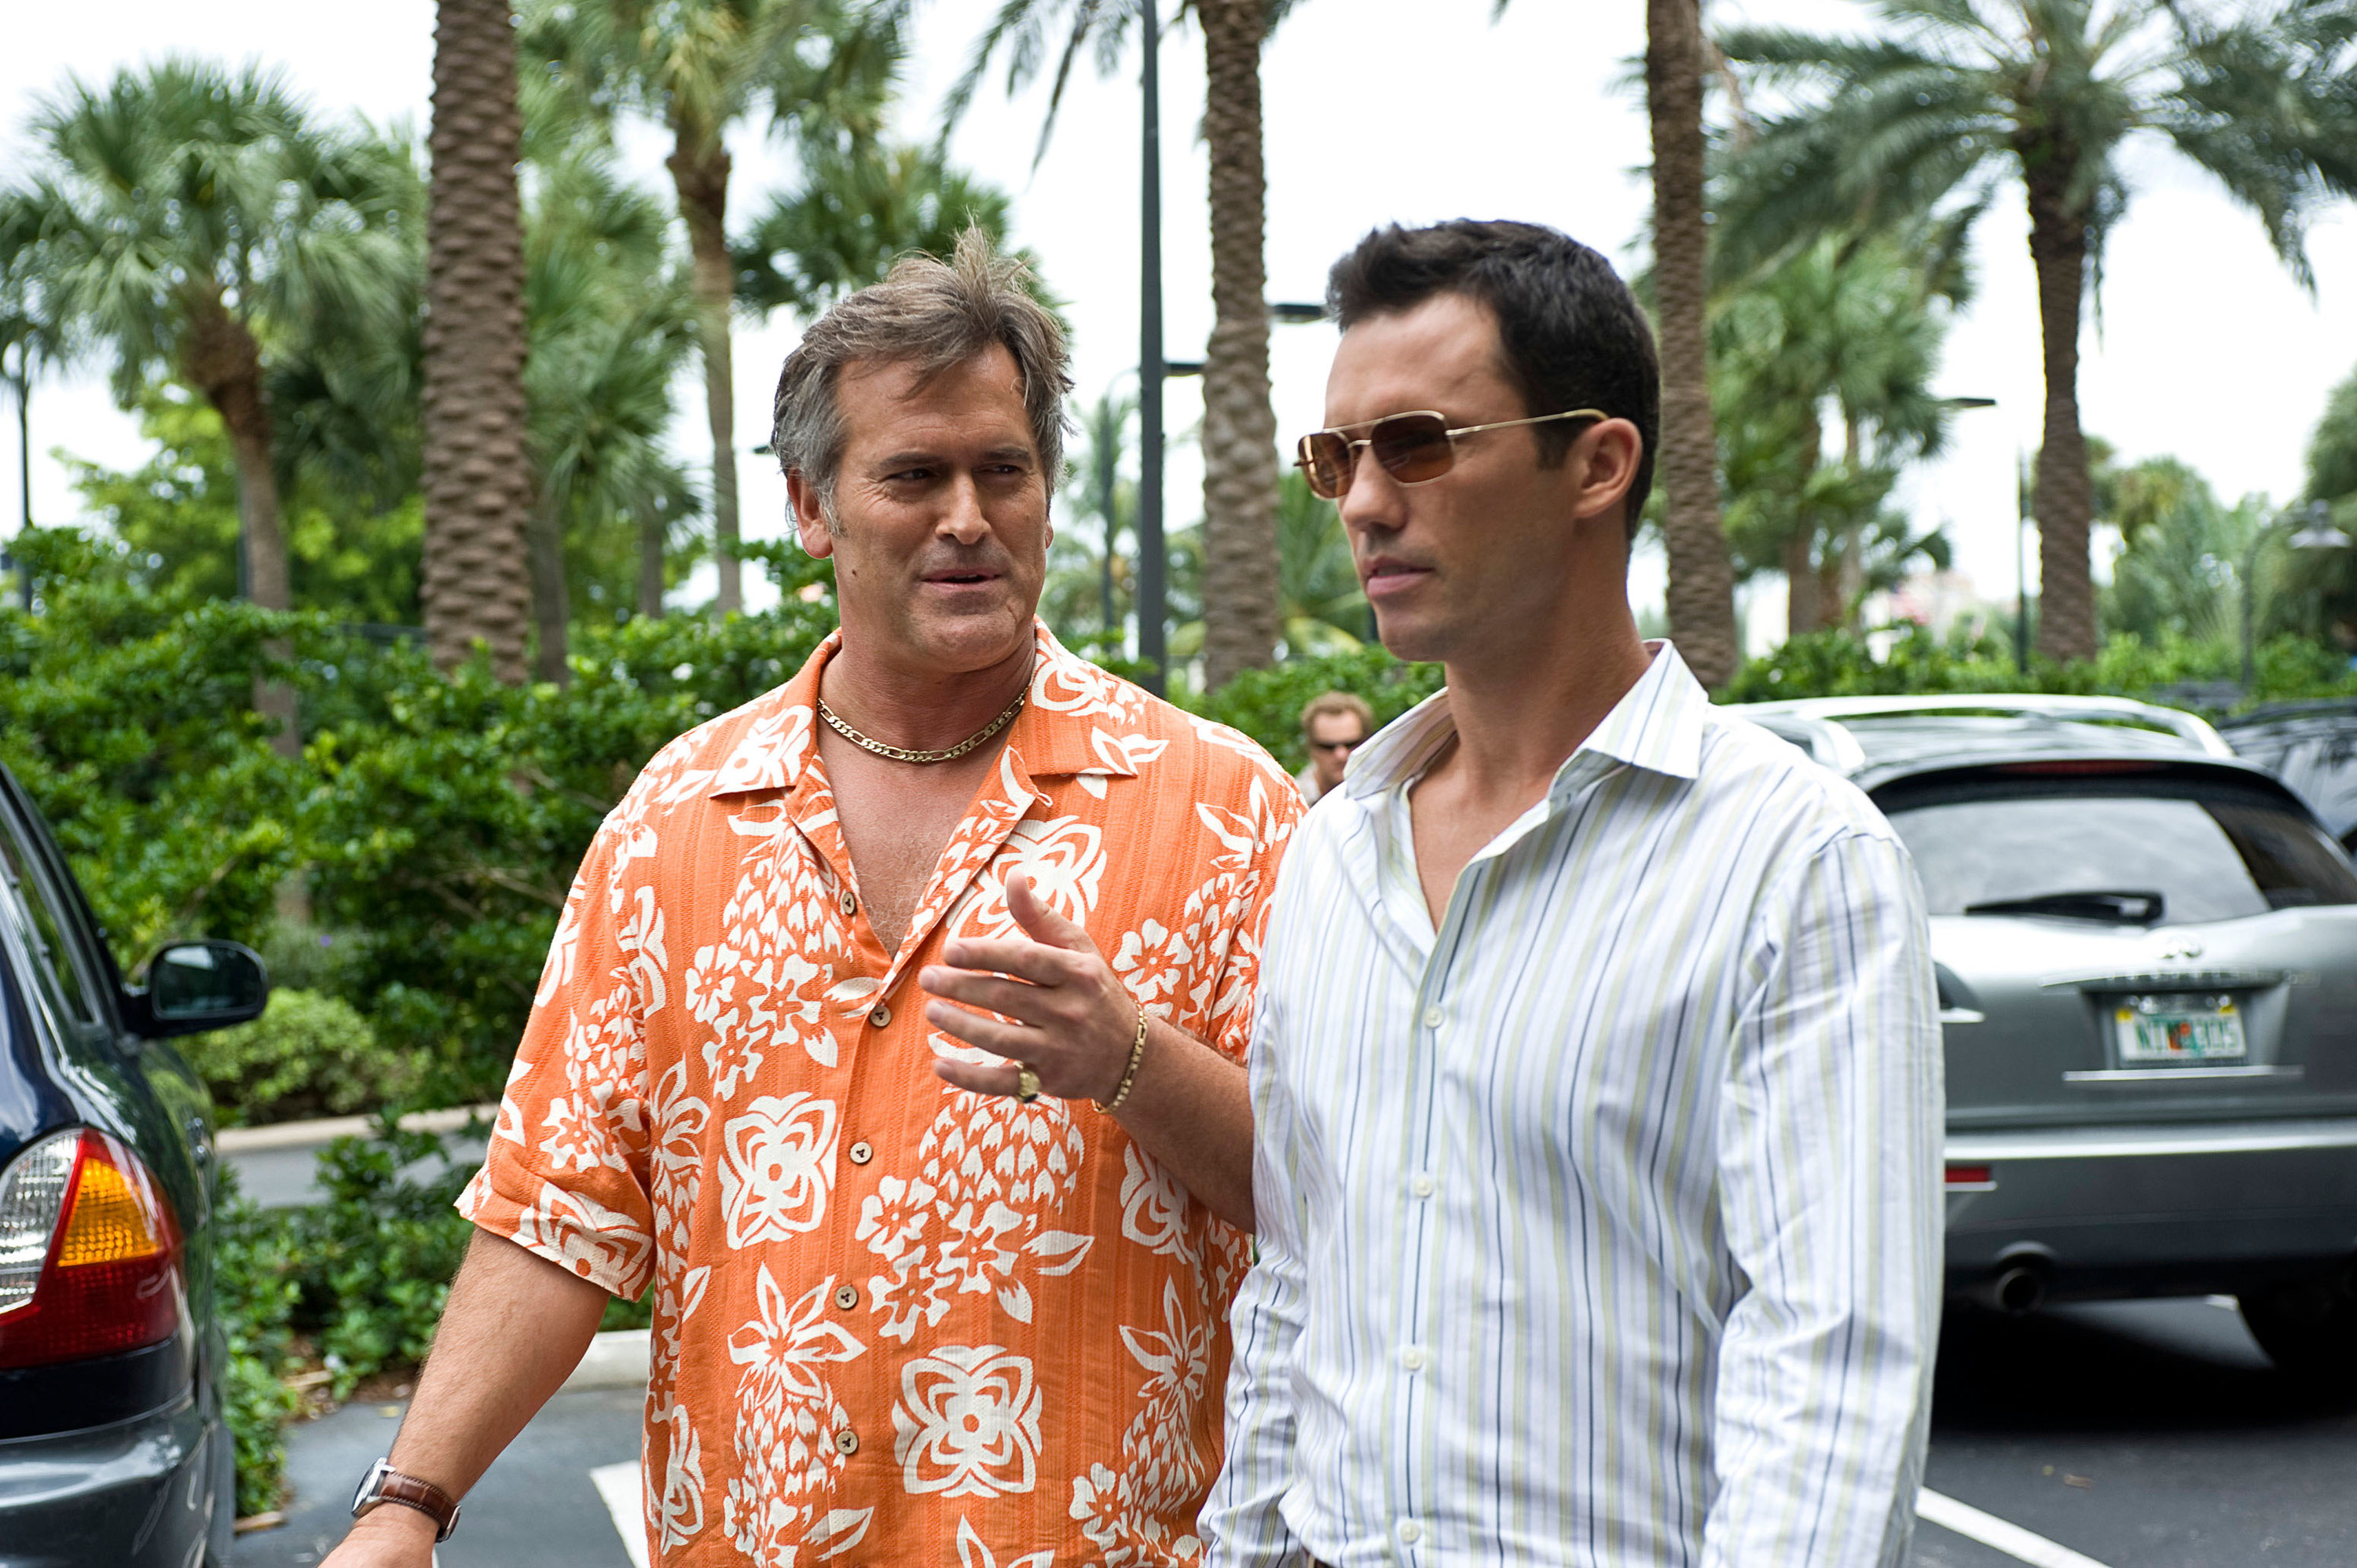 Bruce Campbell and Jeffrey Donovan on the set of Burn Notice in Miami